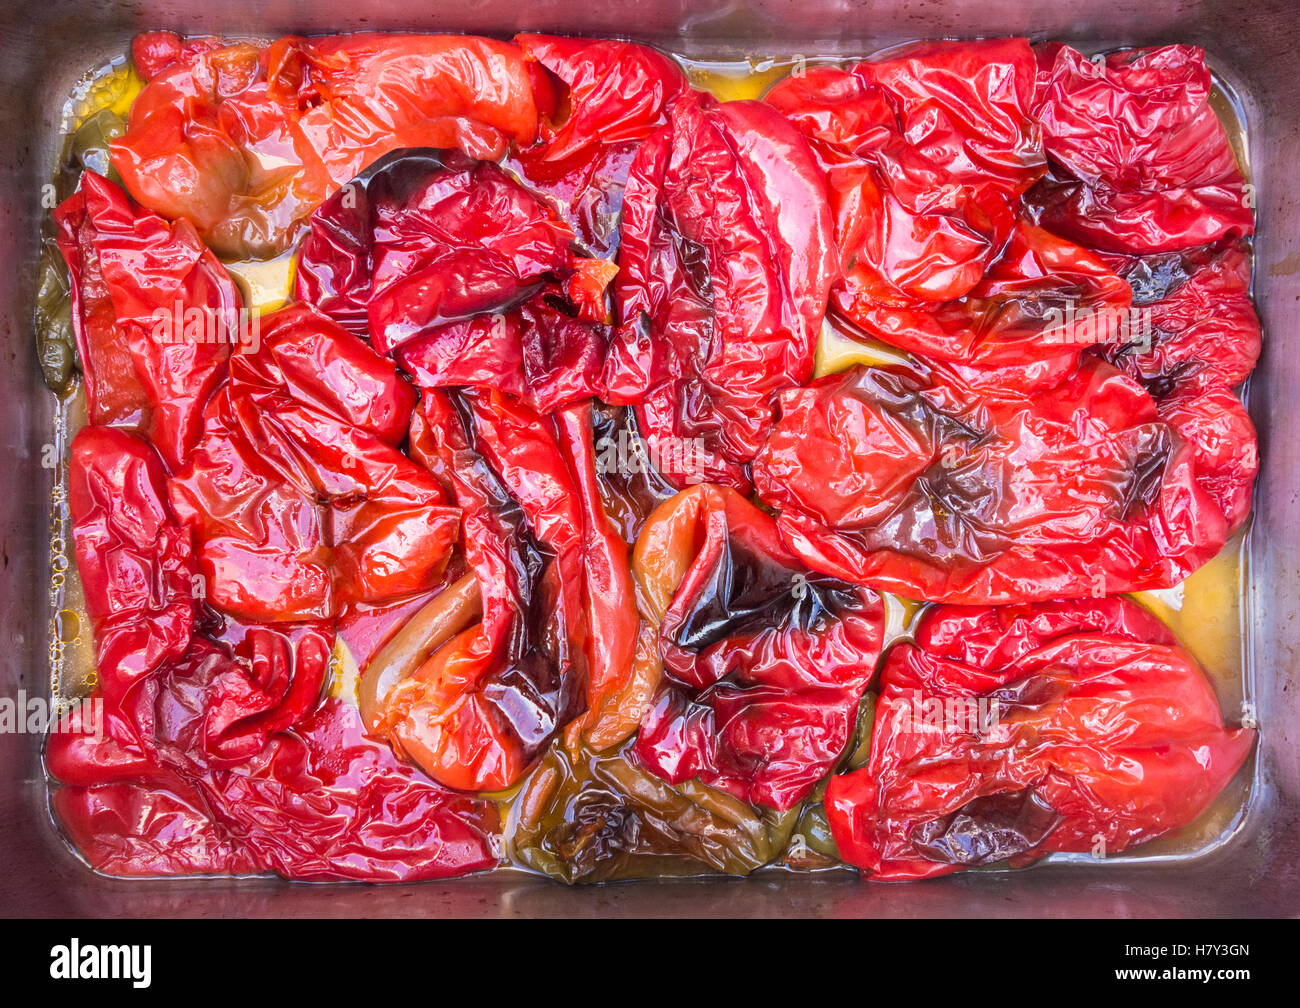 Overhead view of oven roasted red peppers in roasting tin with olive oil. Stock Photo